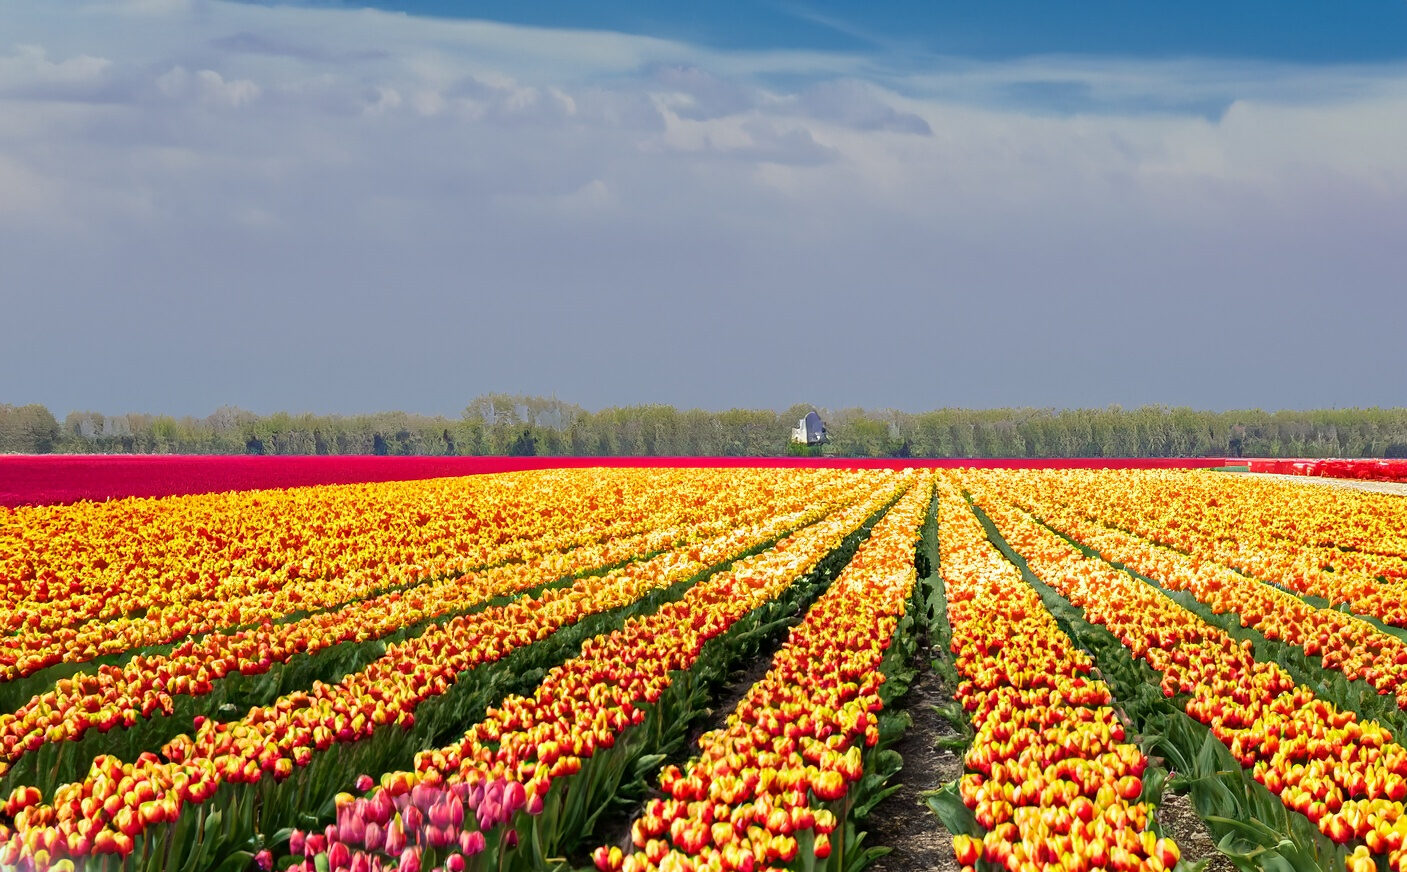 huge tulip fields in the Netherlands, mostly yellow and pink flowers